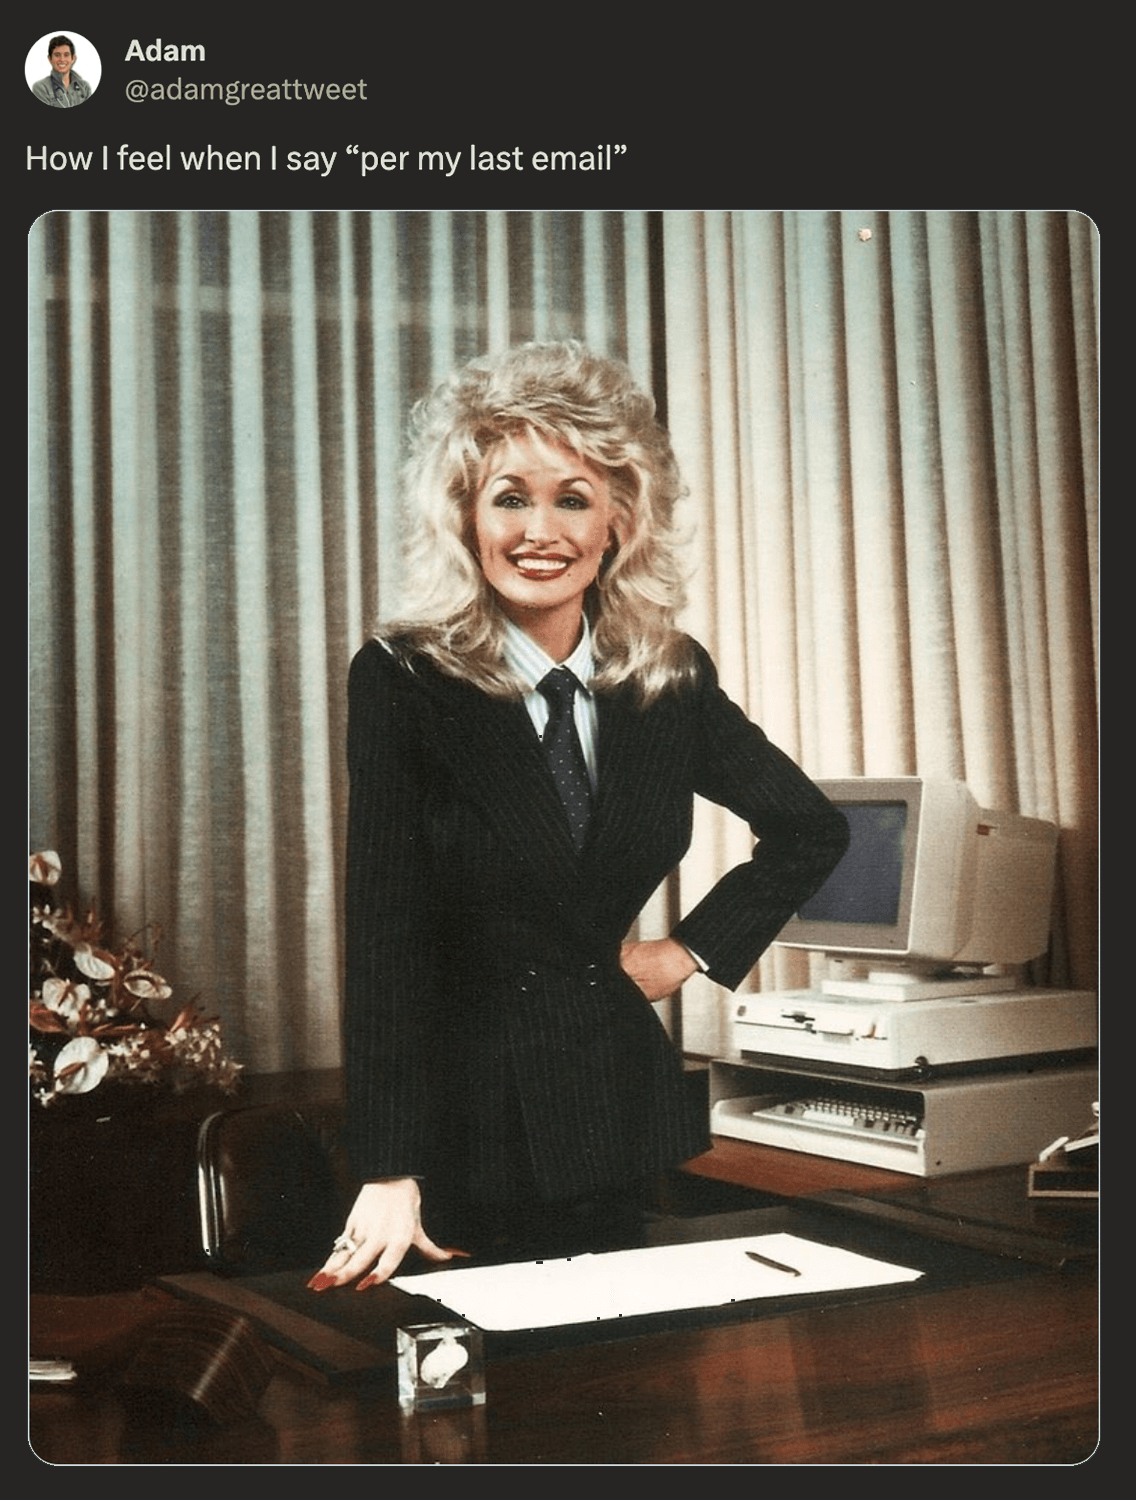 Adam @adamgreattweet on X says, 'How I feel when I say 'per my last email' with a picture of Dolly Parton in a suit in an office setting